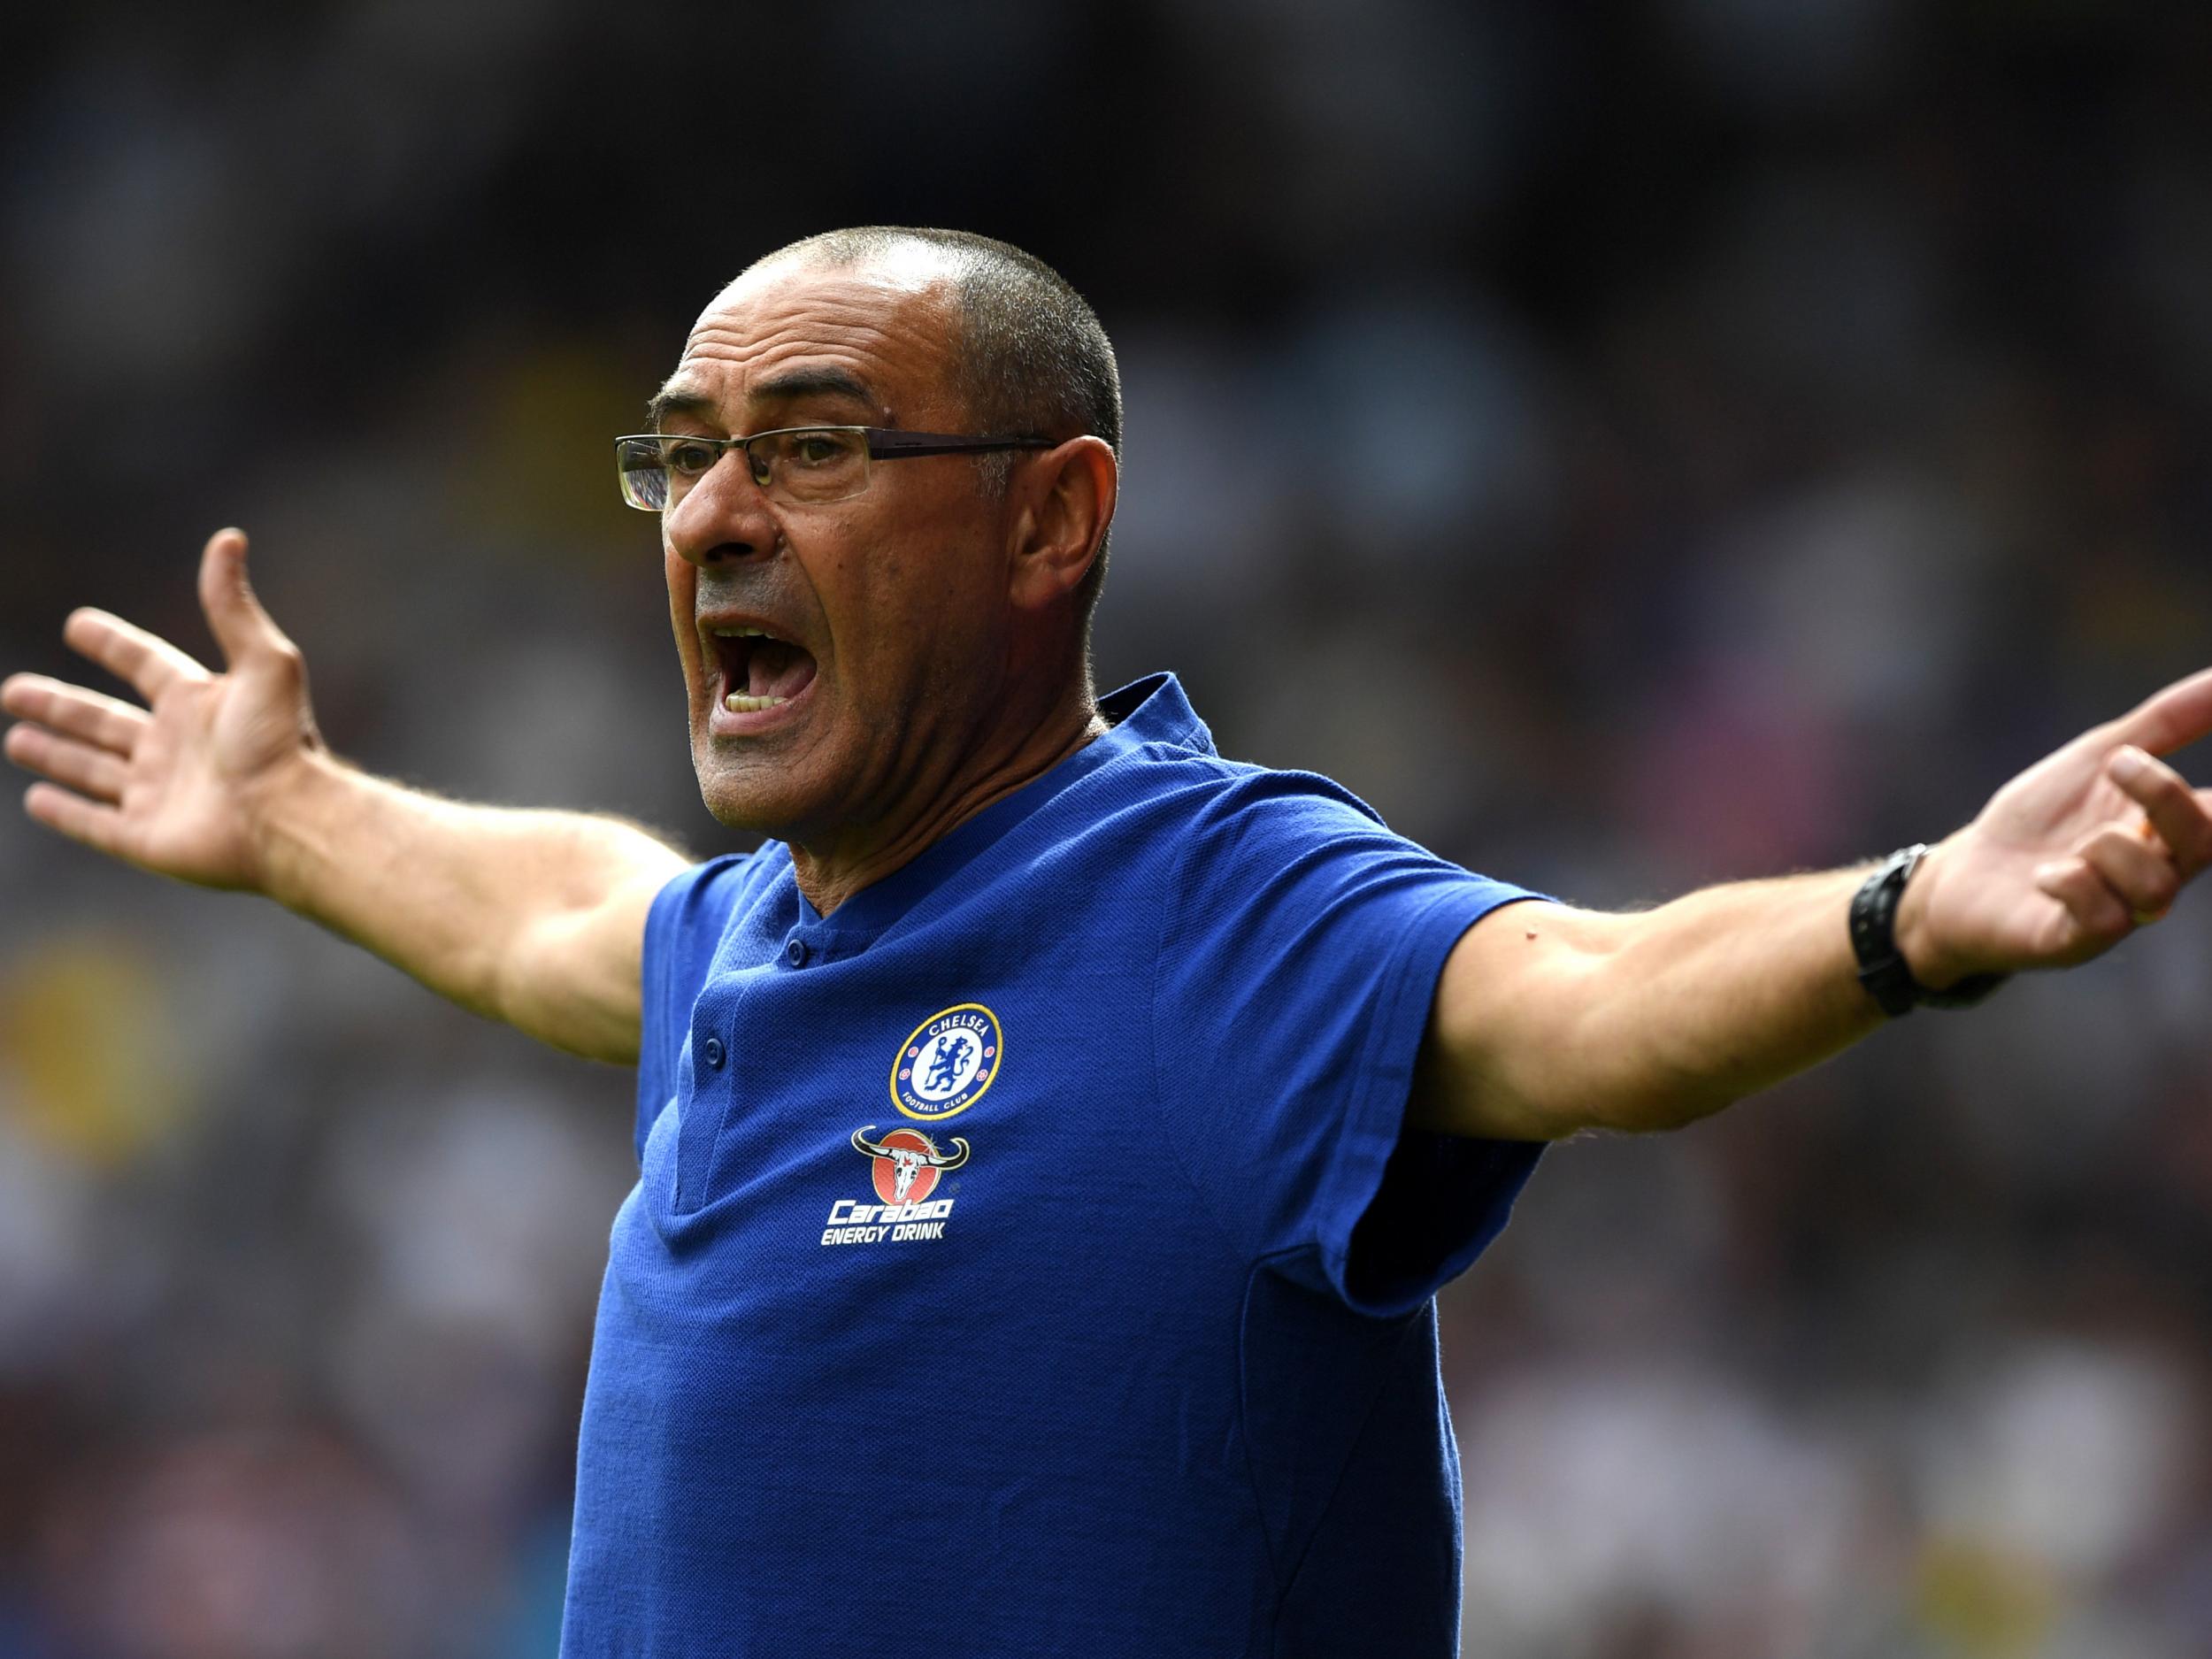 Sarri issues instructions from the sideline at the John Smith Stadium